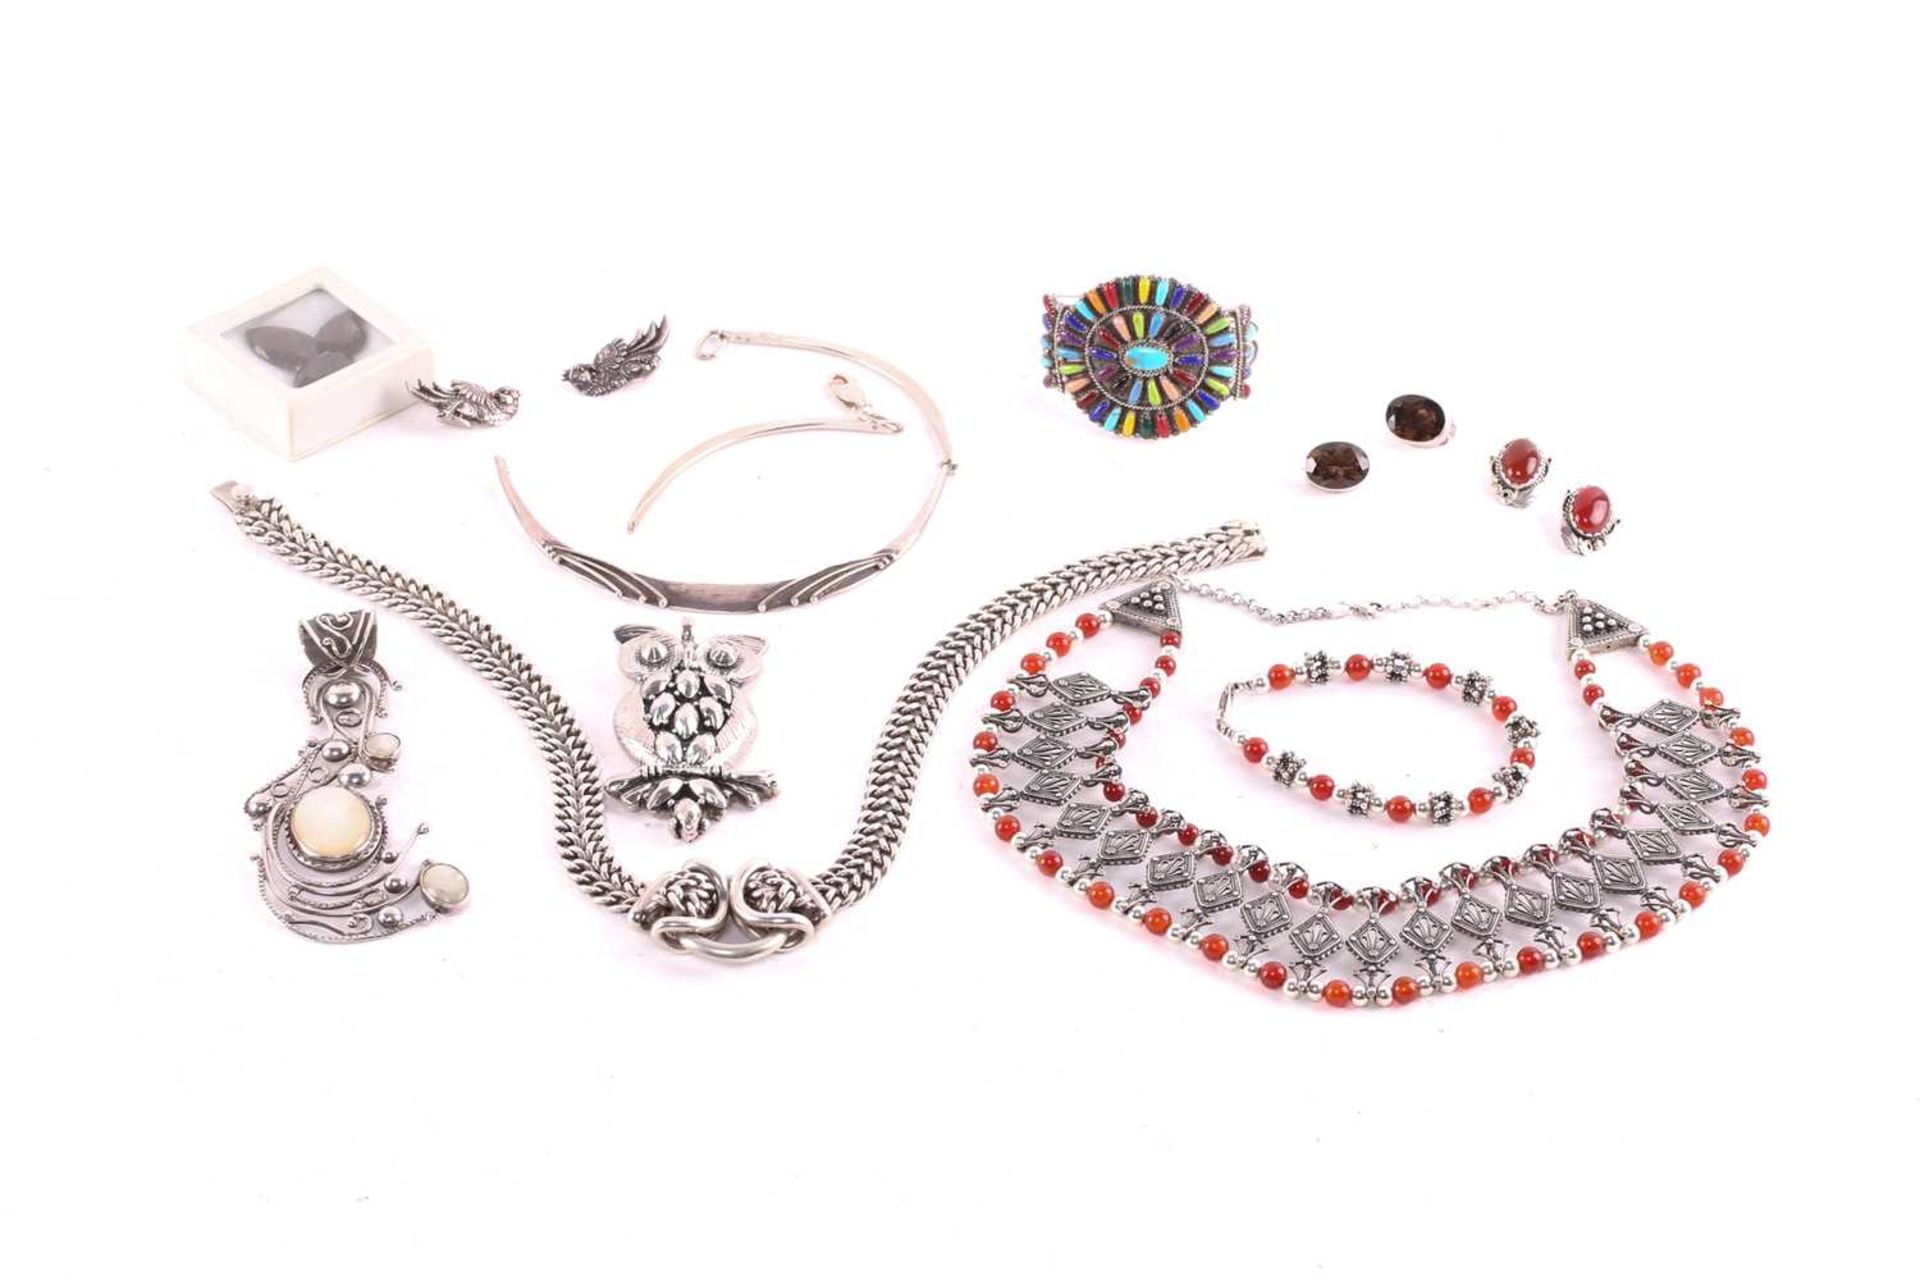 A quantity of silver and white metal jewellery; including a Yemenite necklace, an owl pendant, a